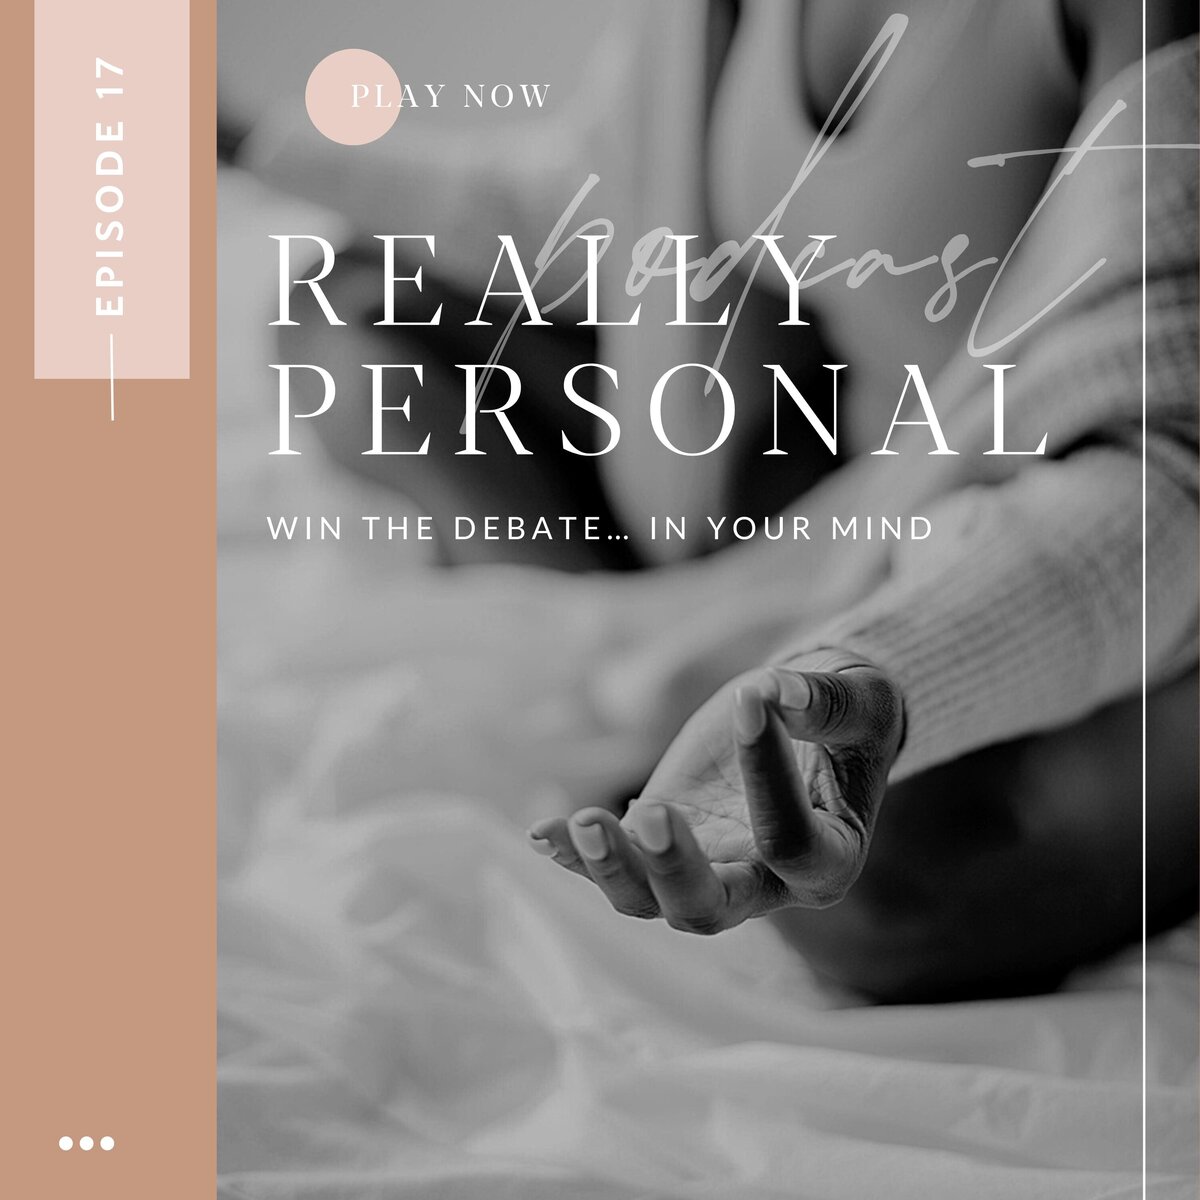 Are you and your partner feeling distant, or struggling to communicate? Do you want to better understand each other, your attachment styles, and how to strengthen the bond you share? Know Your Boo is the perfect podcast for couples looking to nurture healthy conversations and relationships.